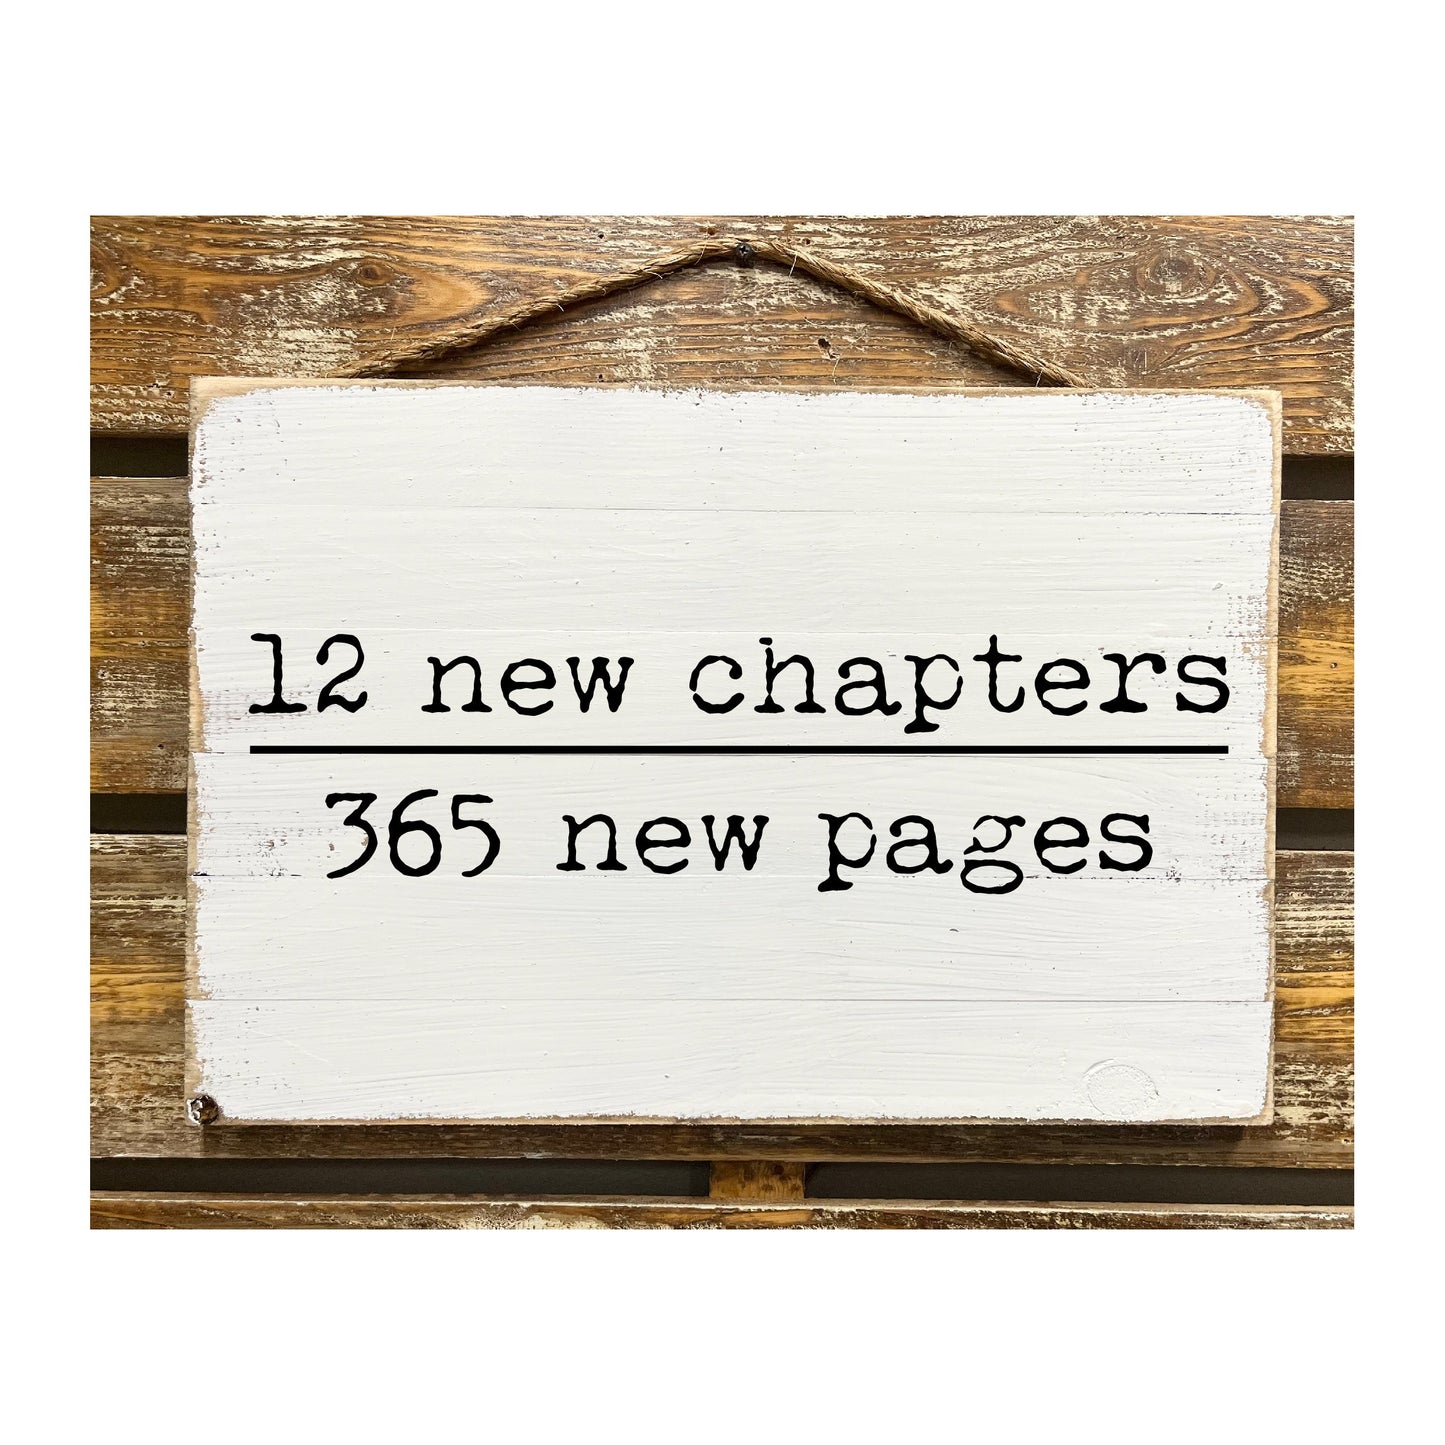 12 New Chapters 365 New Pages